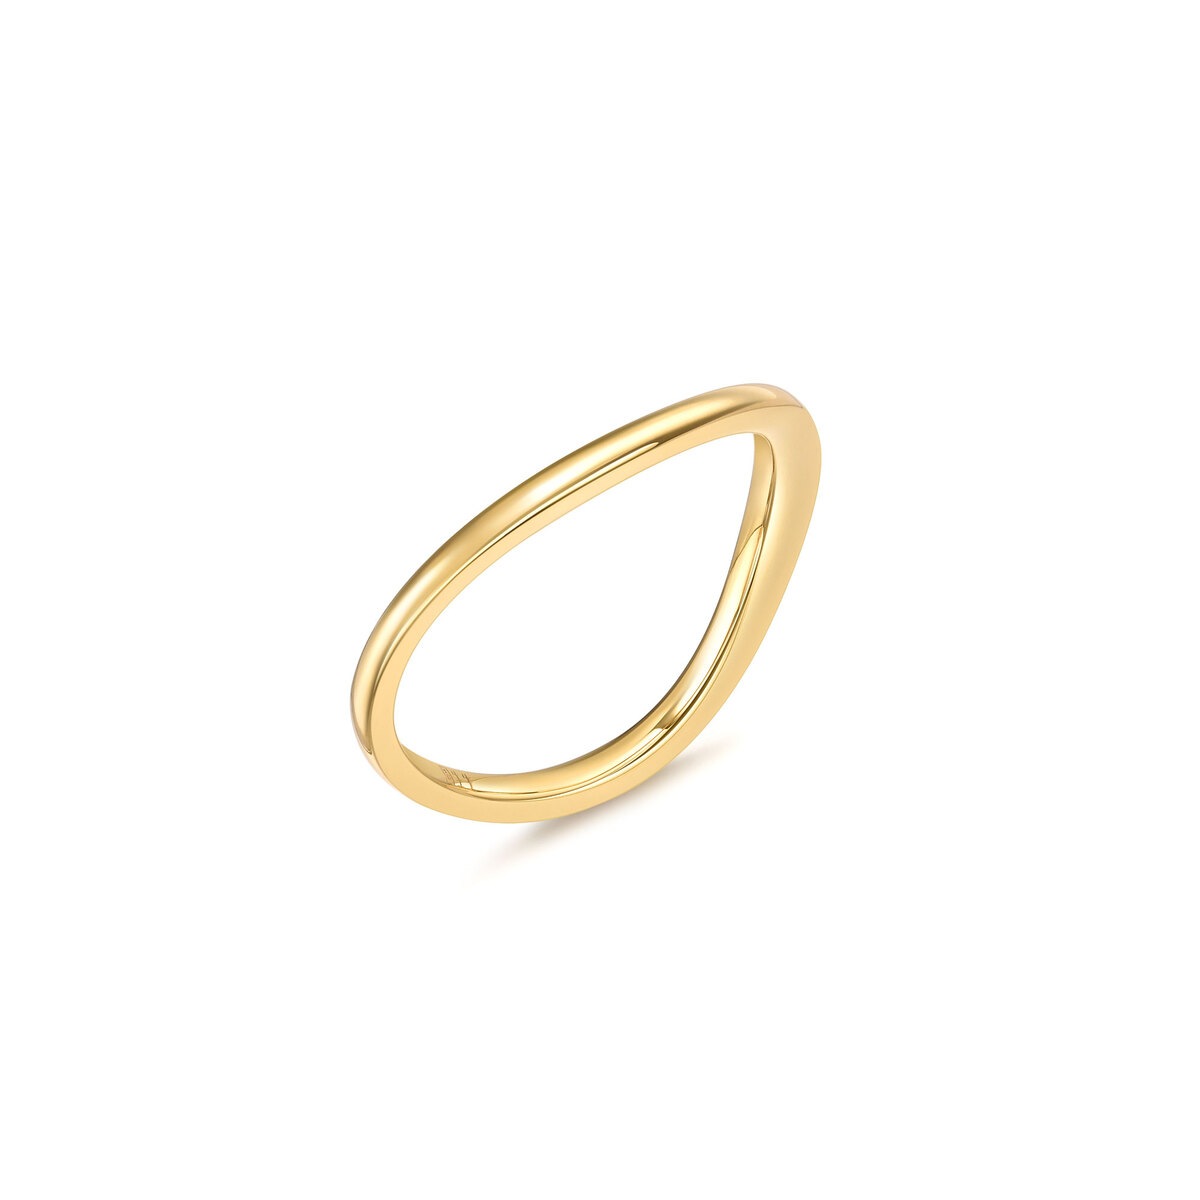 Gold-Filled Sparkle Stacker Ring | Midori Jewelry Co.